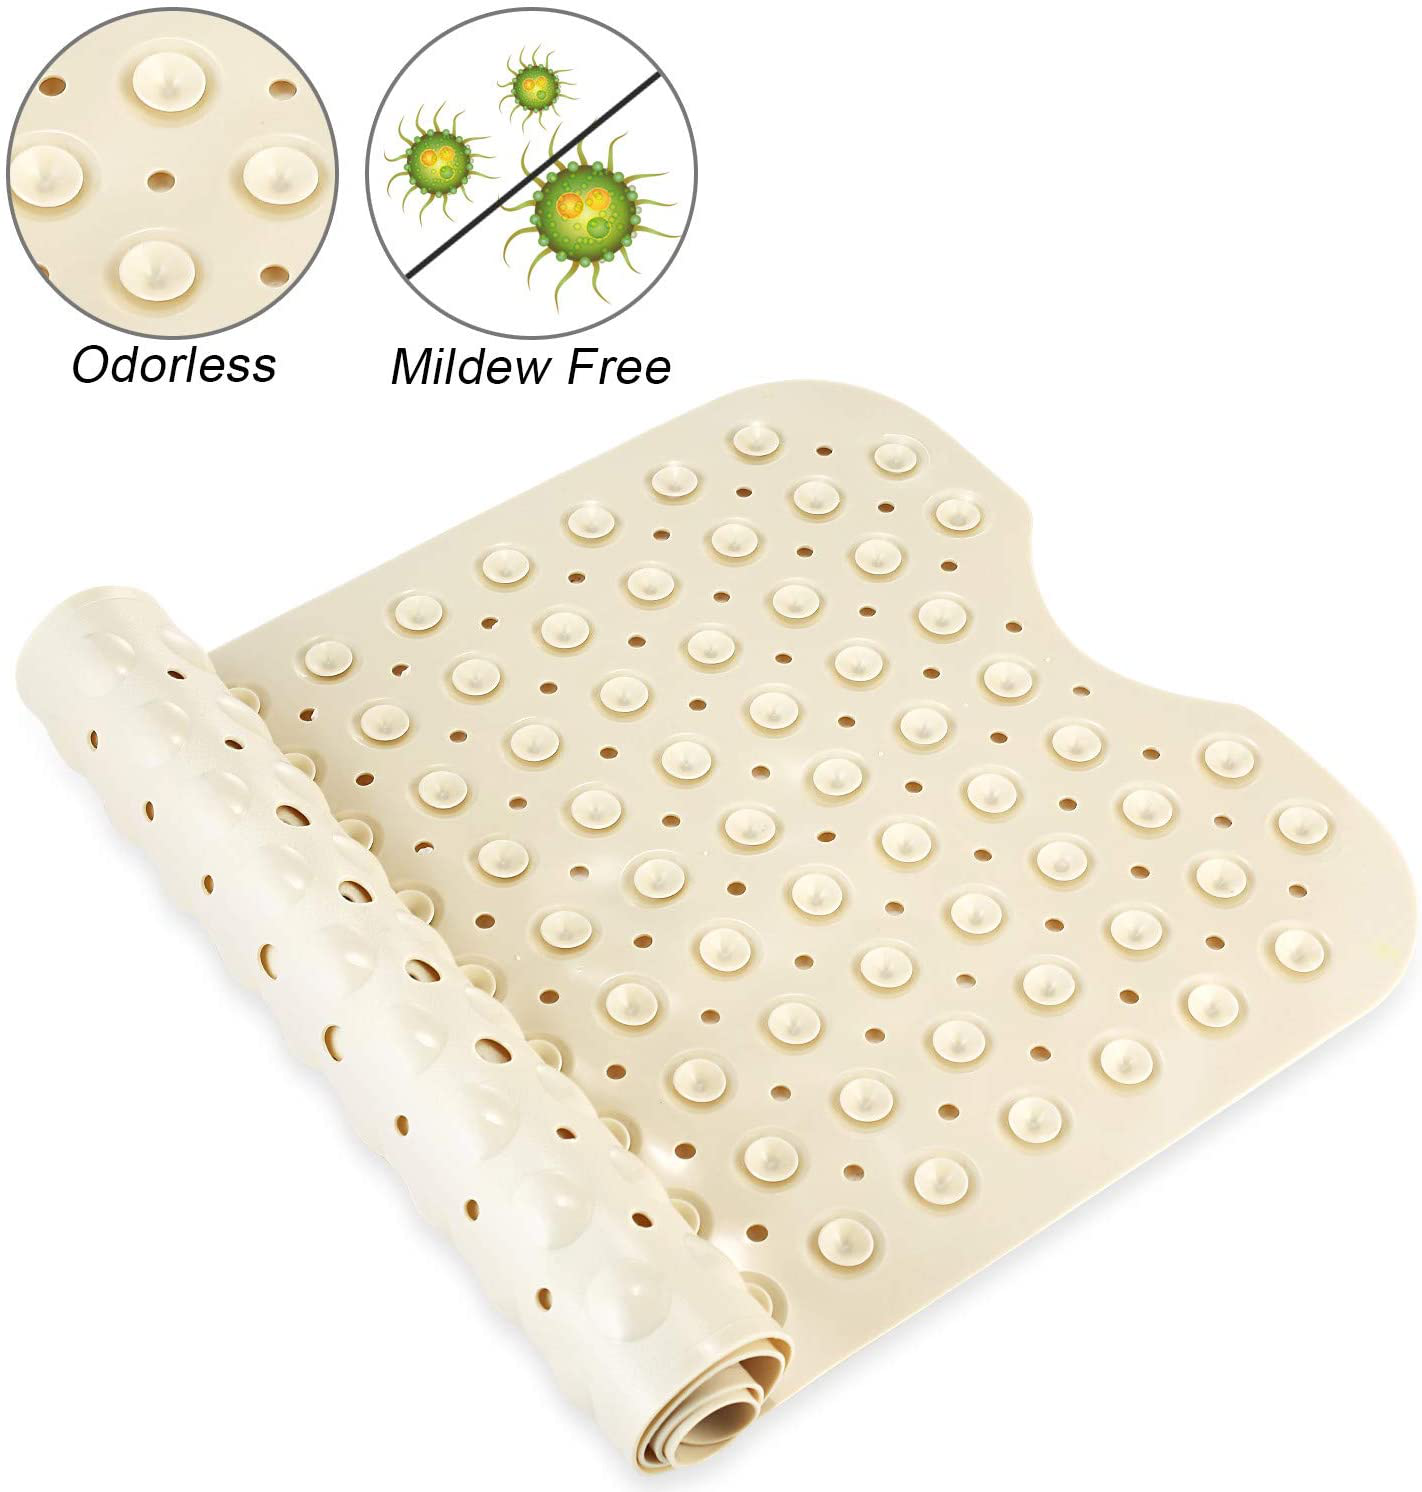 YINENN Bath Tub Shower Mat 40 x 16 Inch Non-Slip and Extra Large, Bathtub Mat with Suction Cups, Machine Washable Bathroom Mats with Drain Holes, Beige